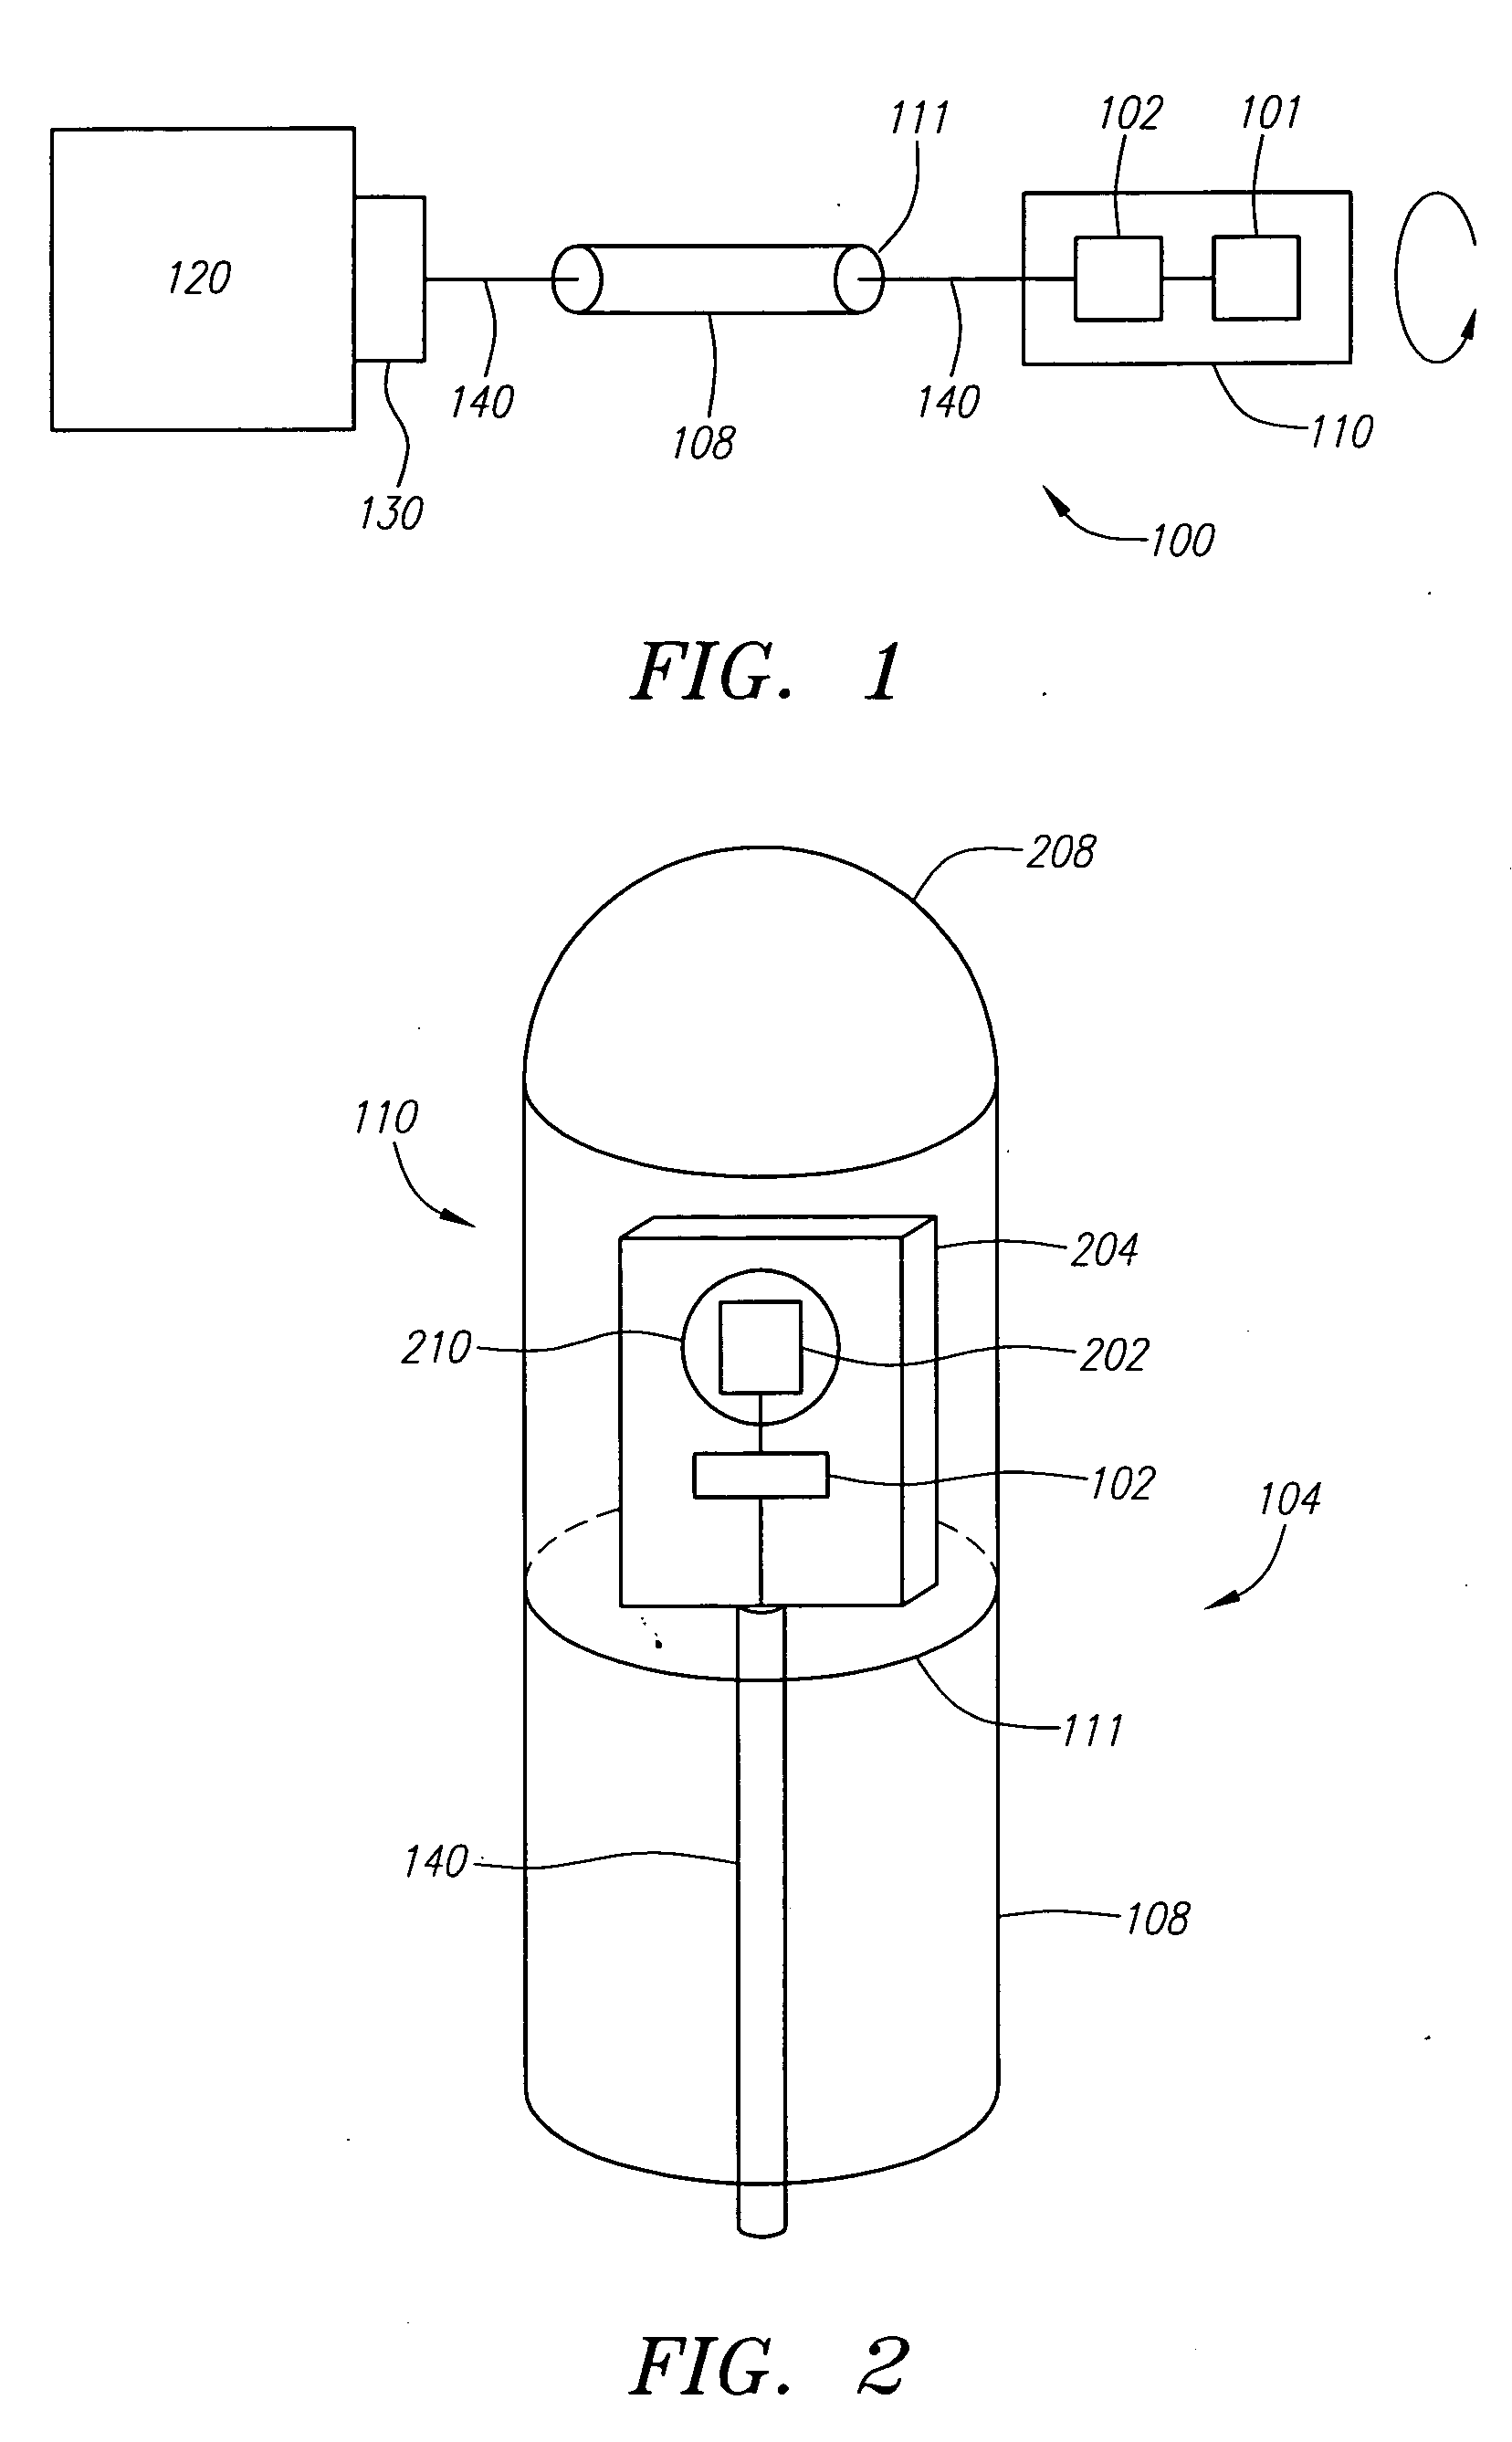 Integrated bias circuitry for ultrasound imaging devices